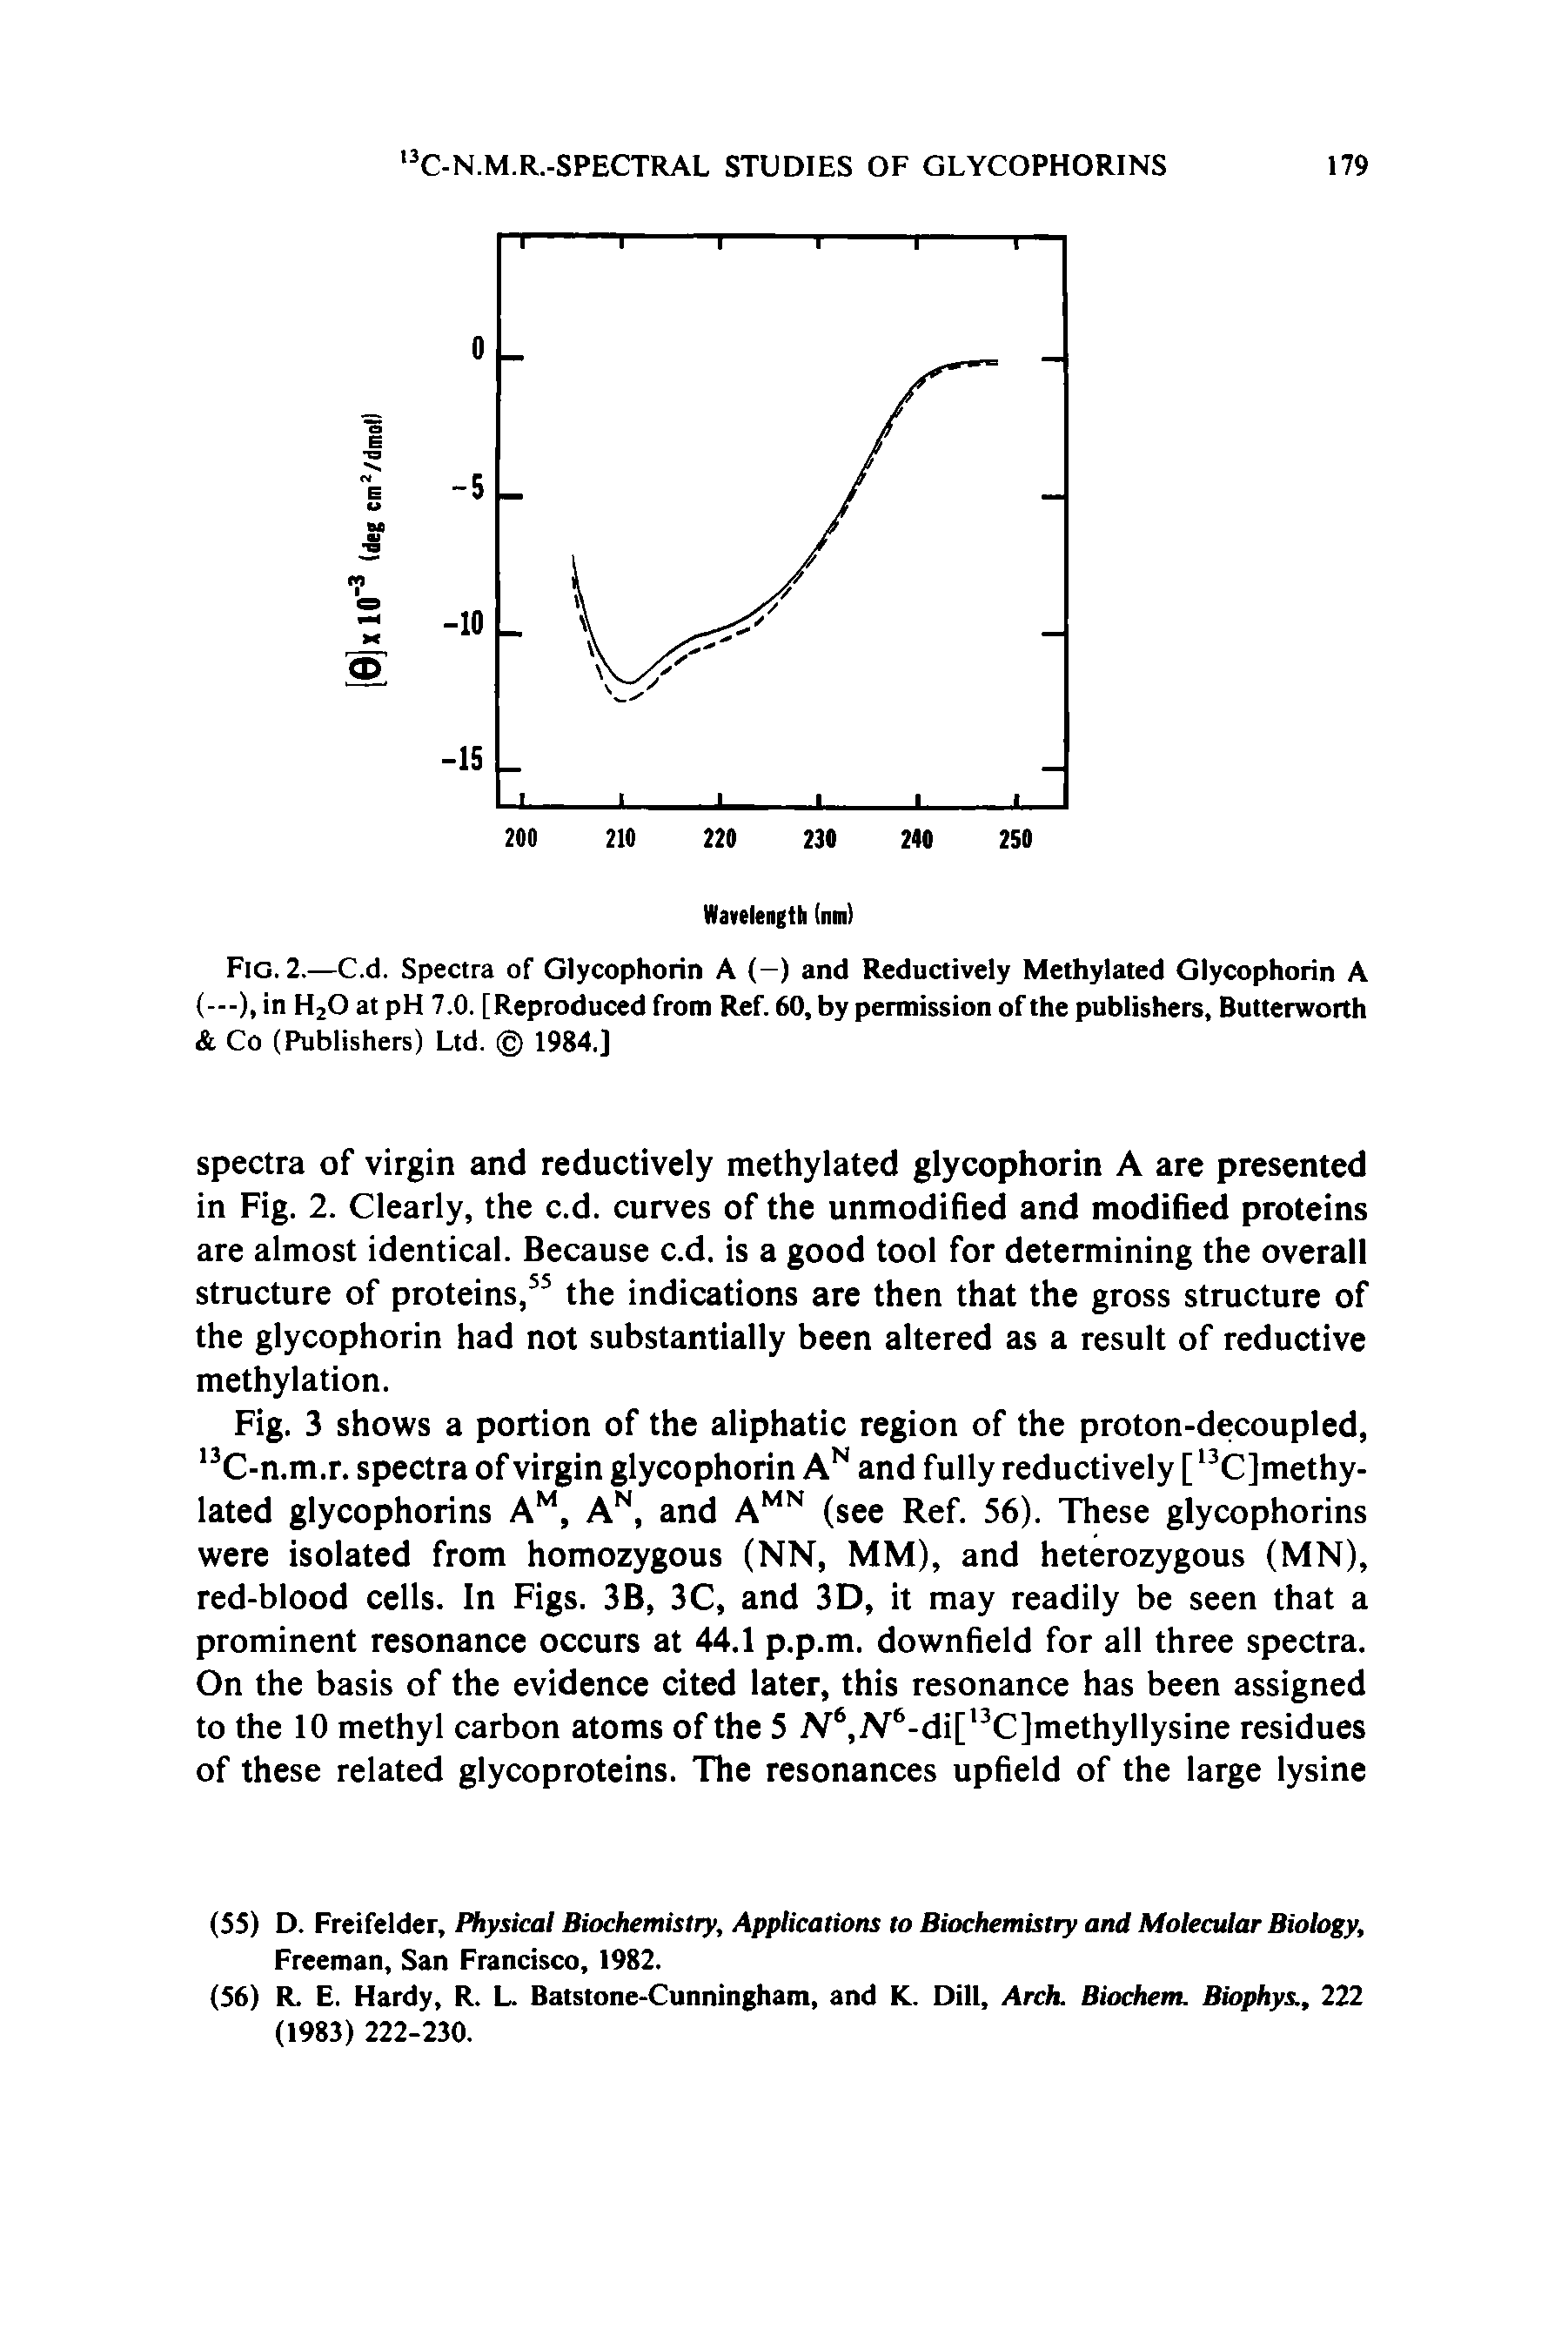 Fig. 2.—C.d. Spectra of Glycophorin A (-) and Reductively Methylated Glycophorin A in H2O at pH 7.0. [Reproduced from Ref. 60, by permission of the publishers, Butterworth Co (Publishers) Ltd. 1984.]...